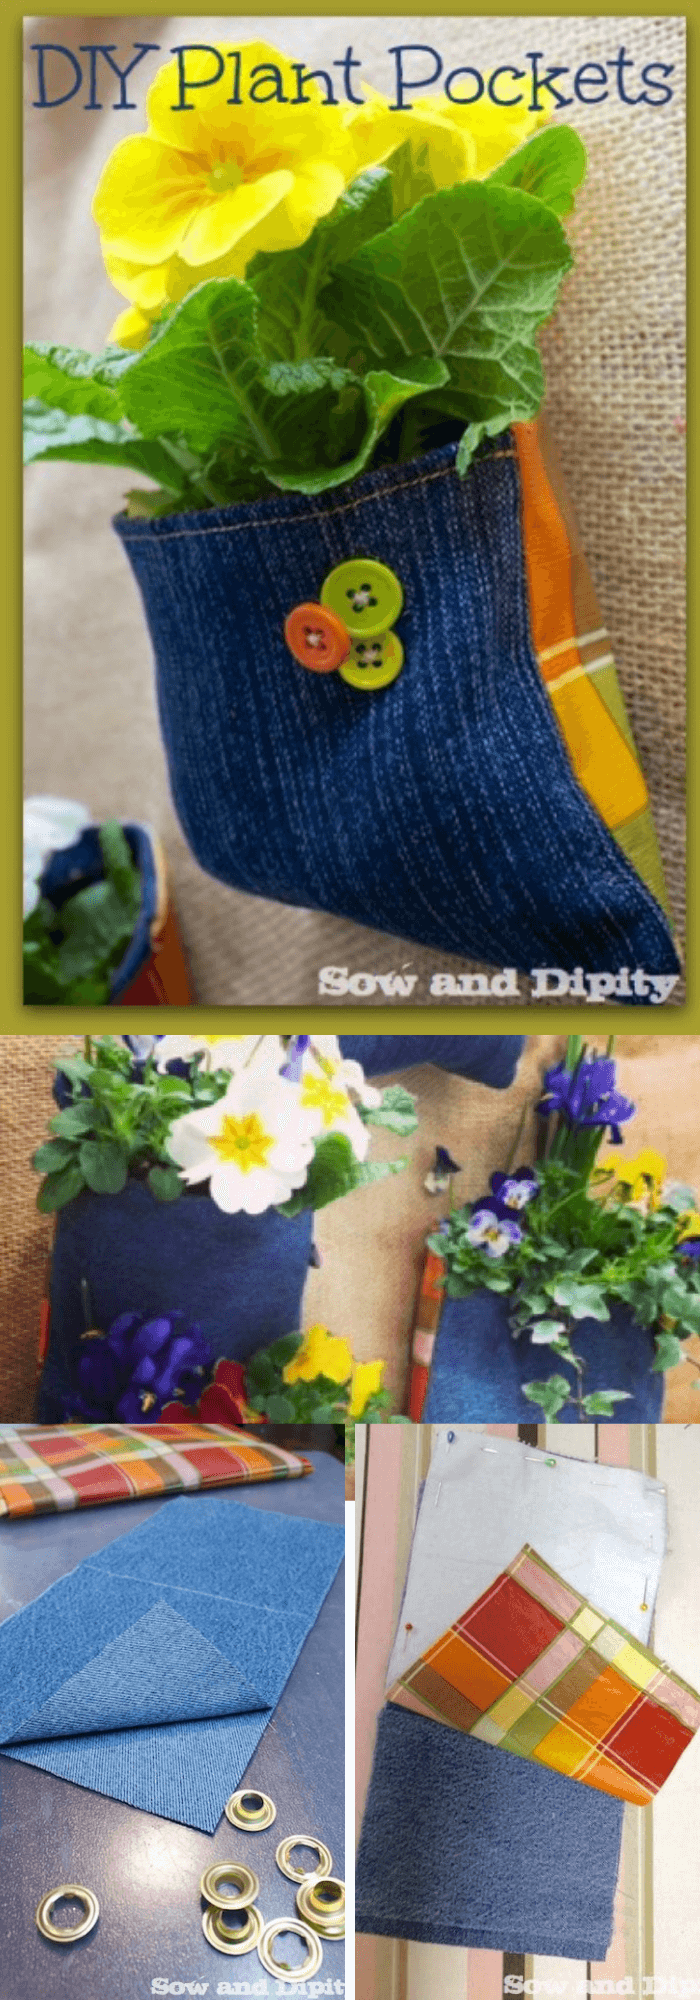 DIY Plant Pockets with Recycled Denim